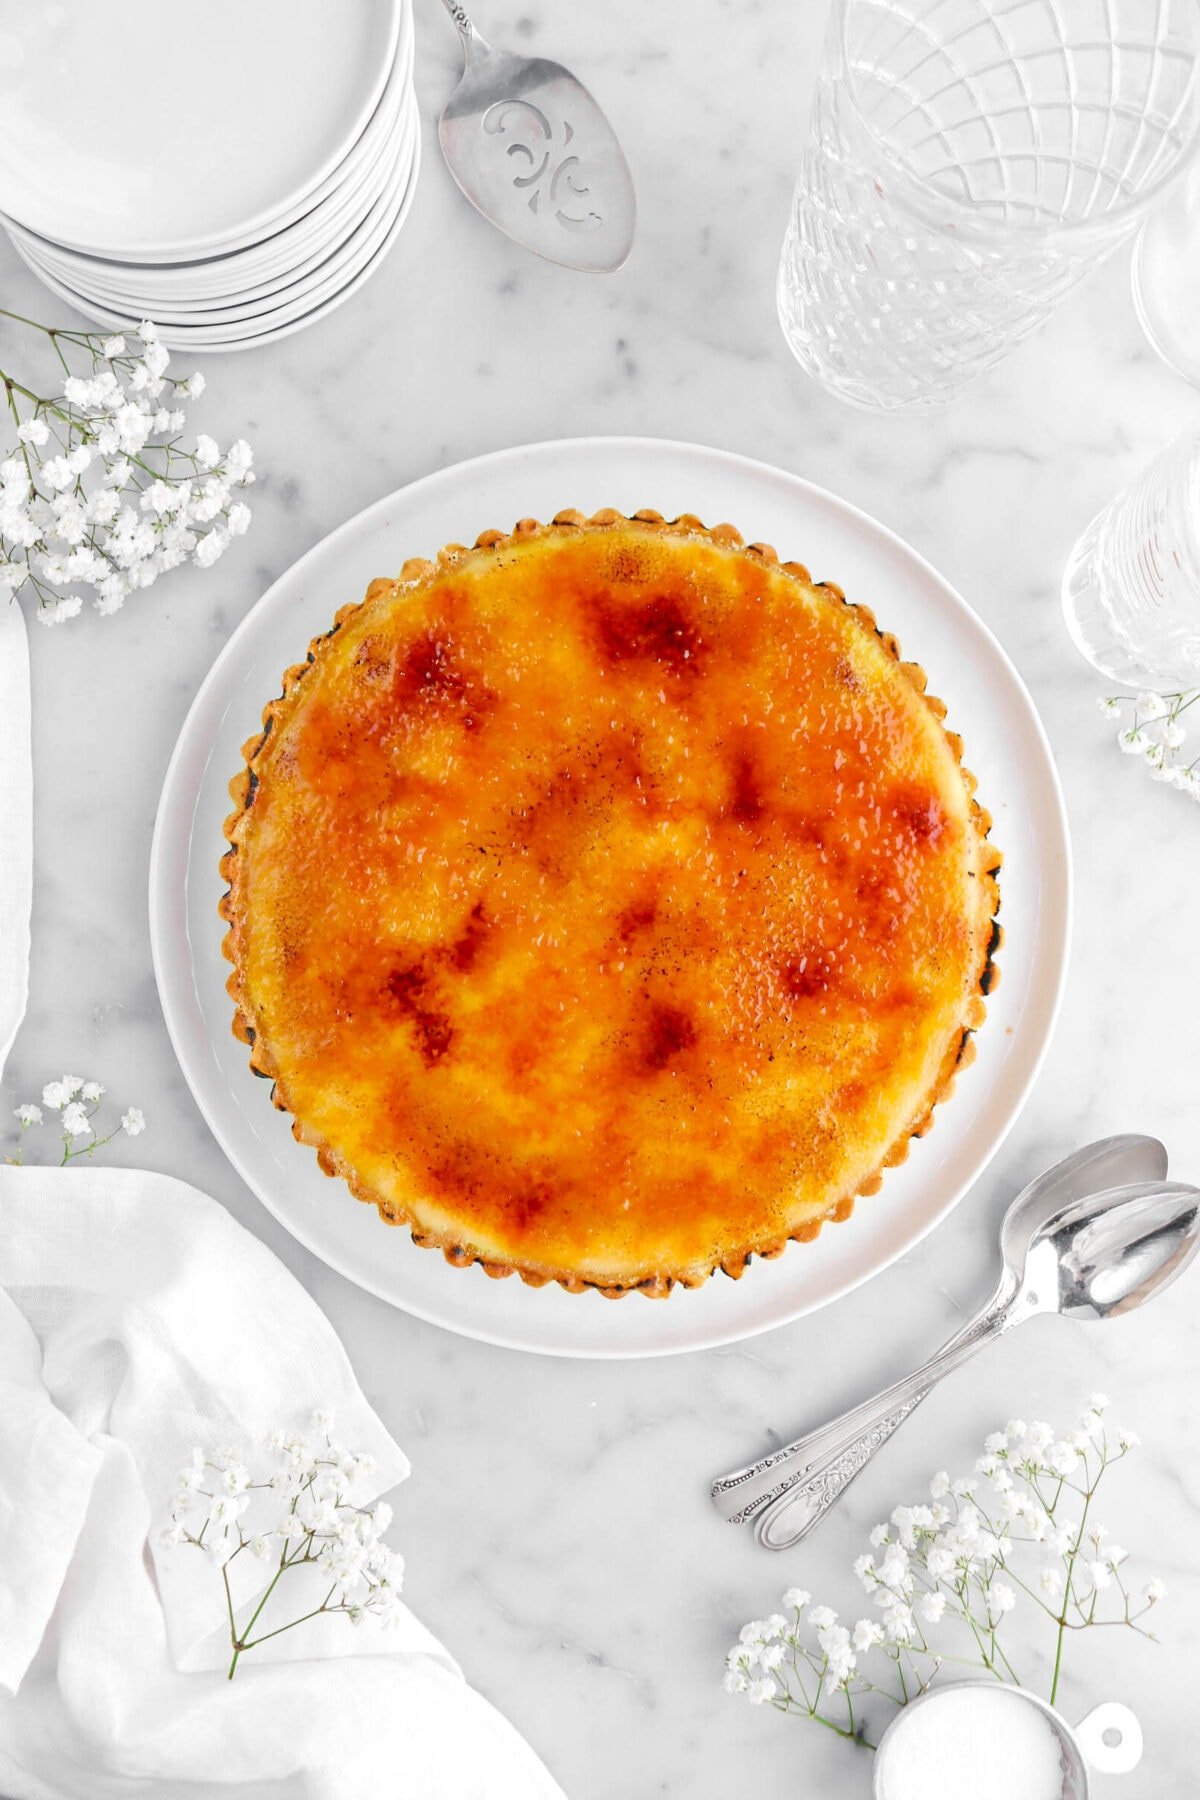 creme brulee tart on white dinner plate with flowers around on marble surface, with plates and empty glasses above tart, and two spoons beside.